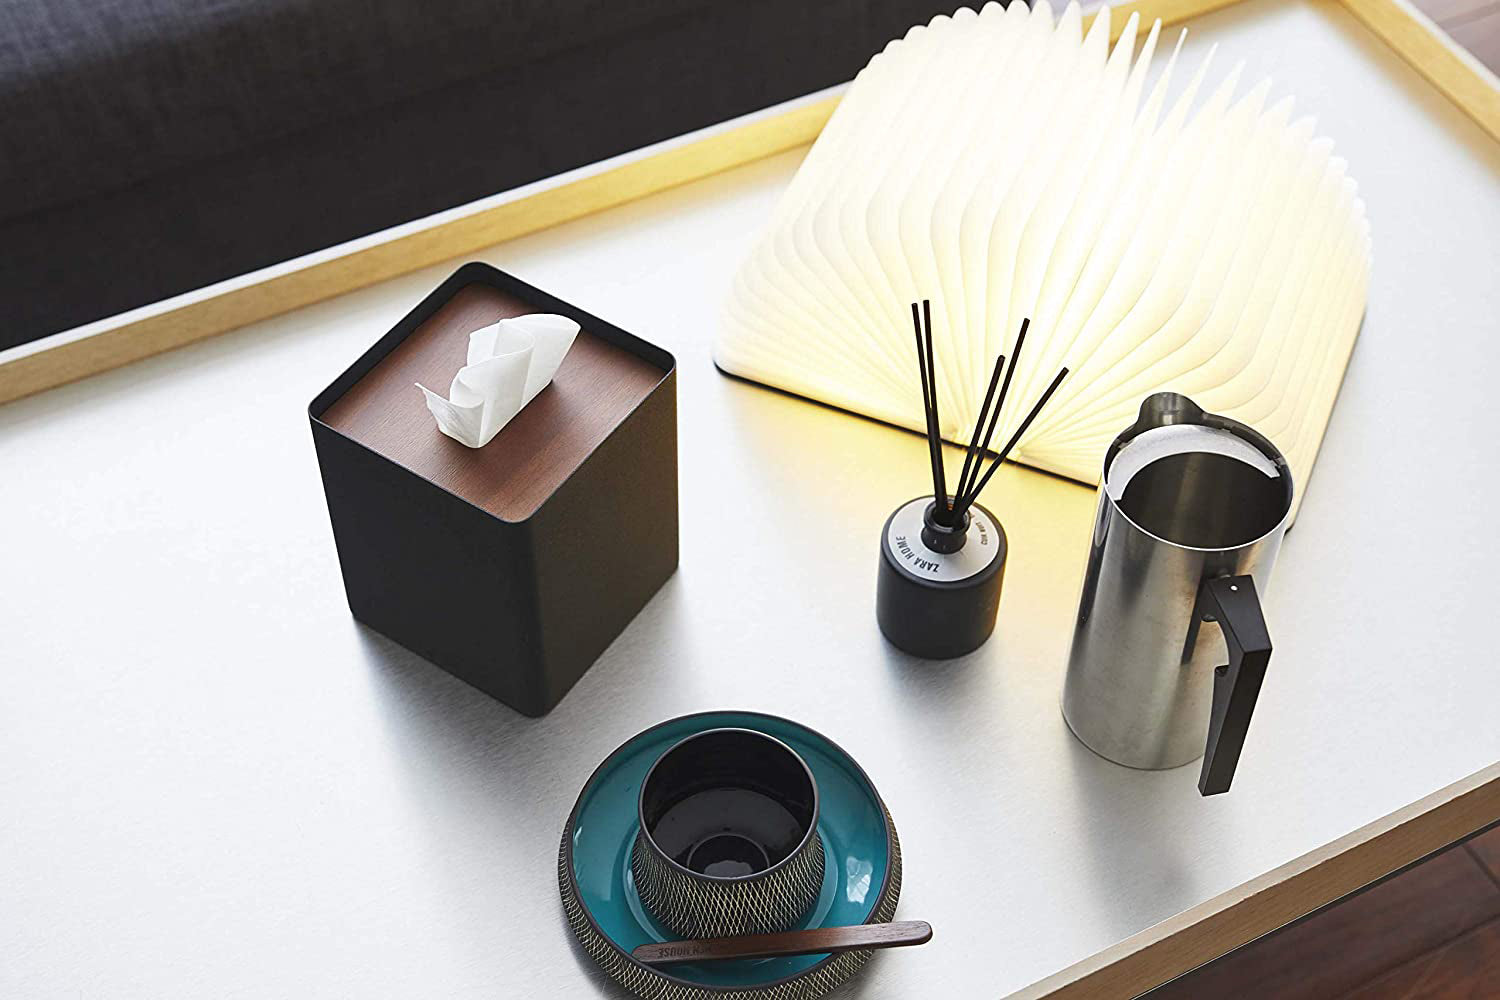 View 13 - Aerial view of black Tissue Case on table next to book light, cup, and décor pieces by Yamazaki Home.